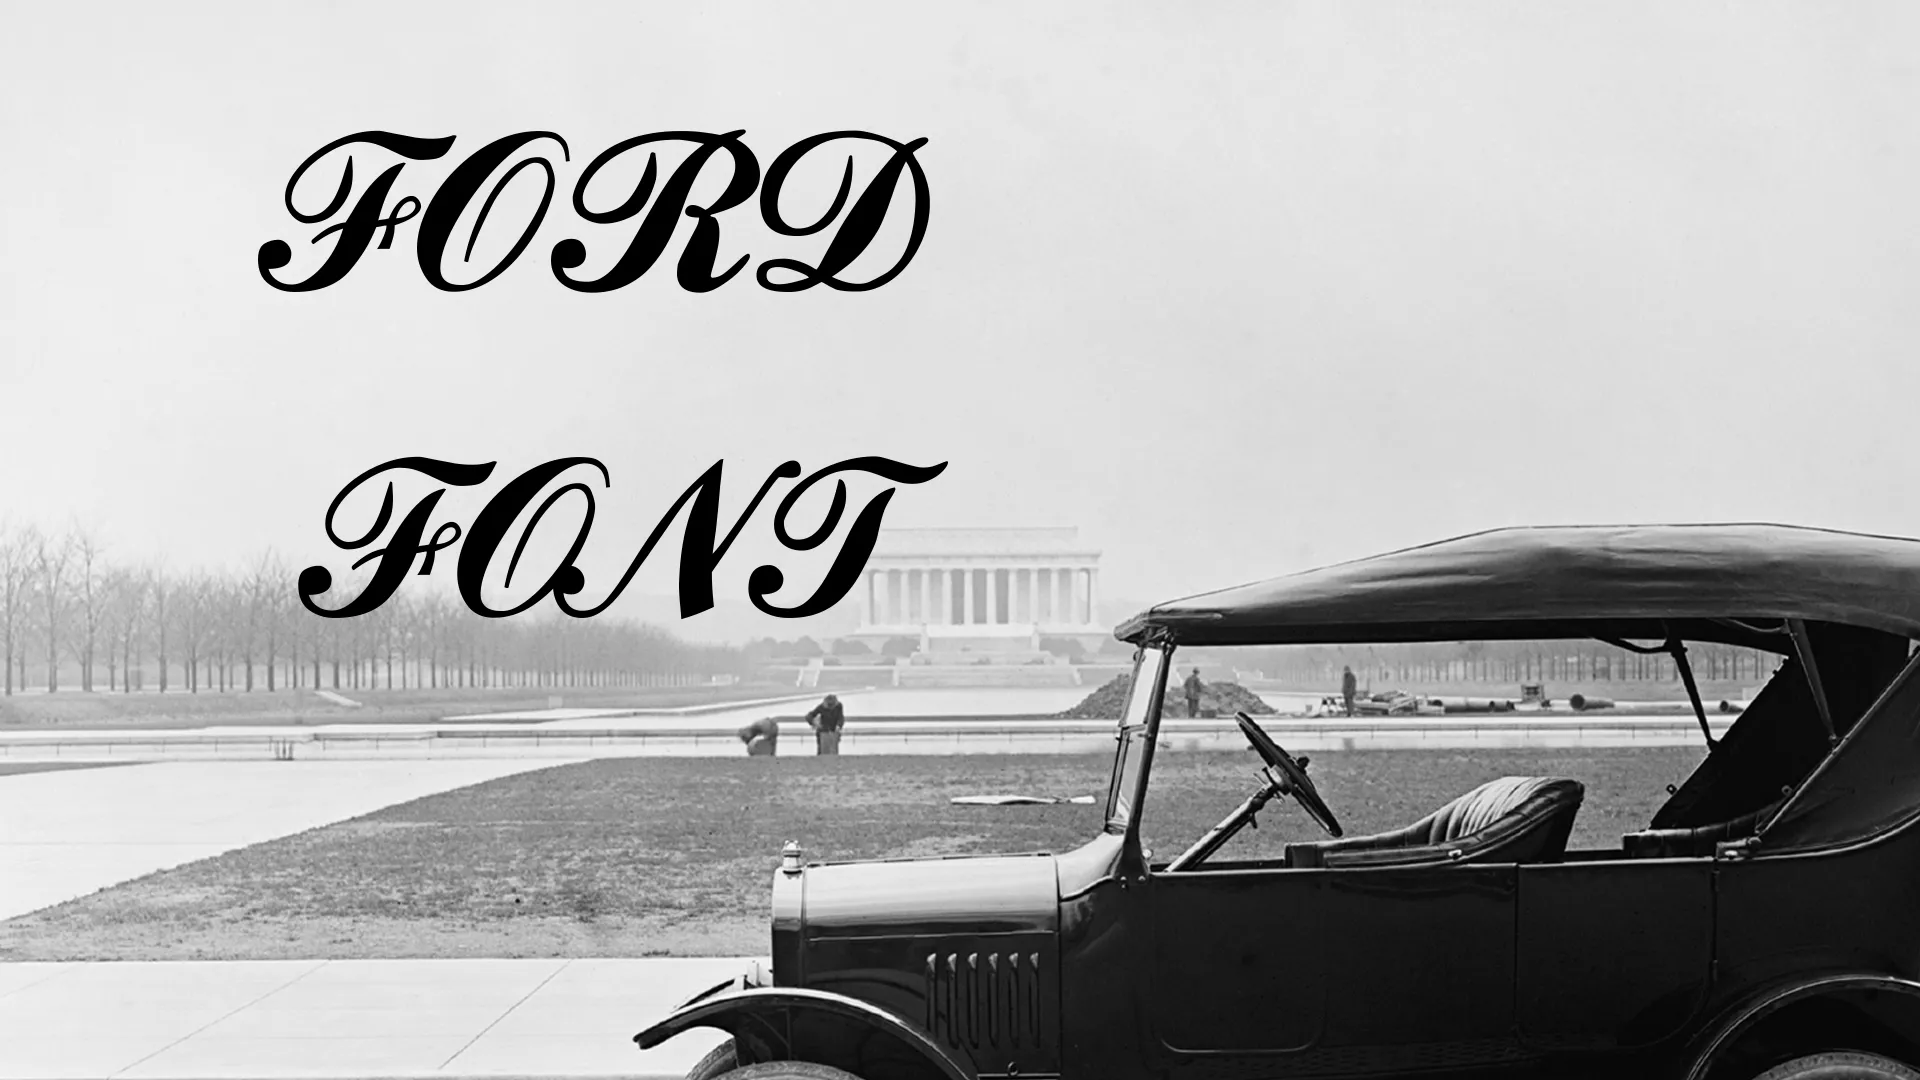 Ford Font